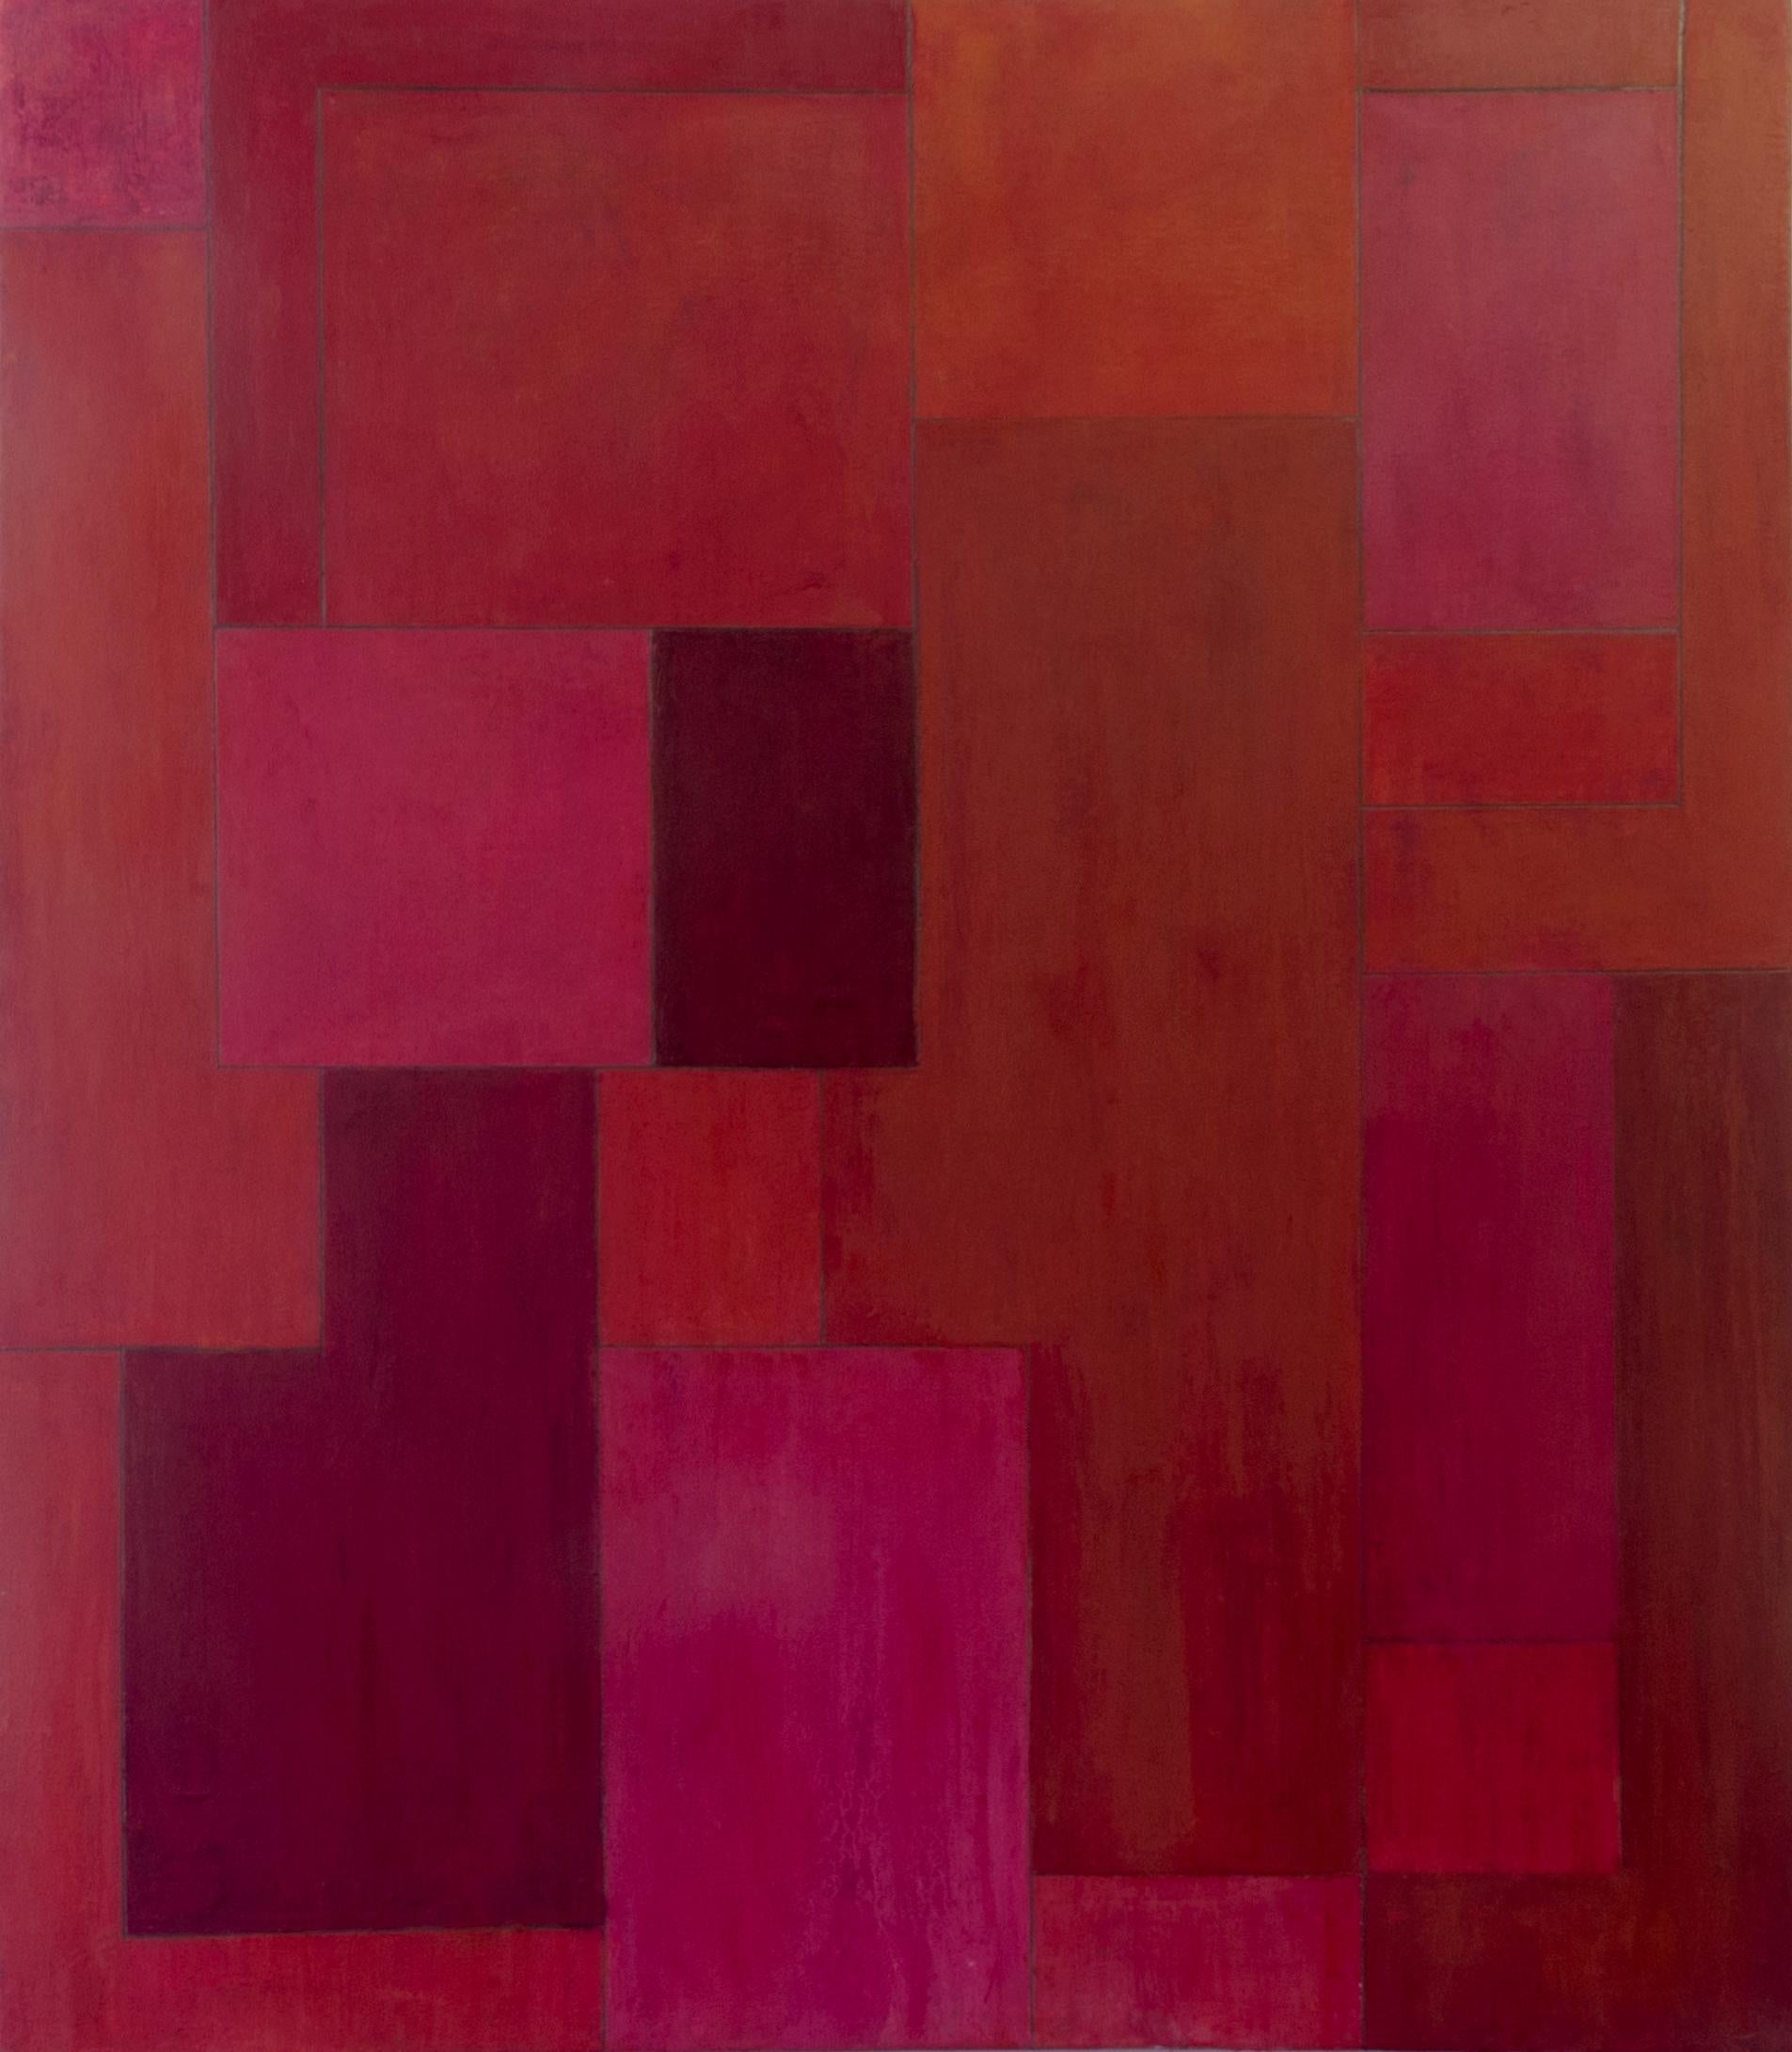 Stephen Cimini Abstract Painting - red zone, Painting, Oil on Canvas